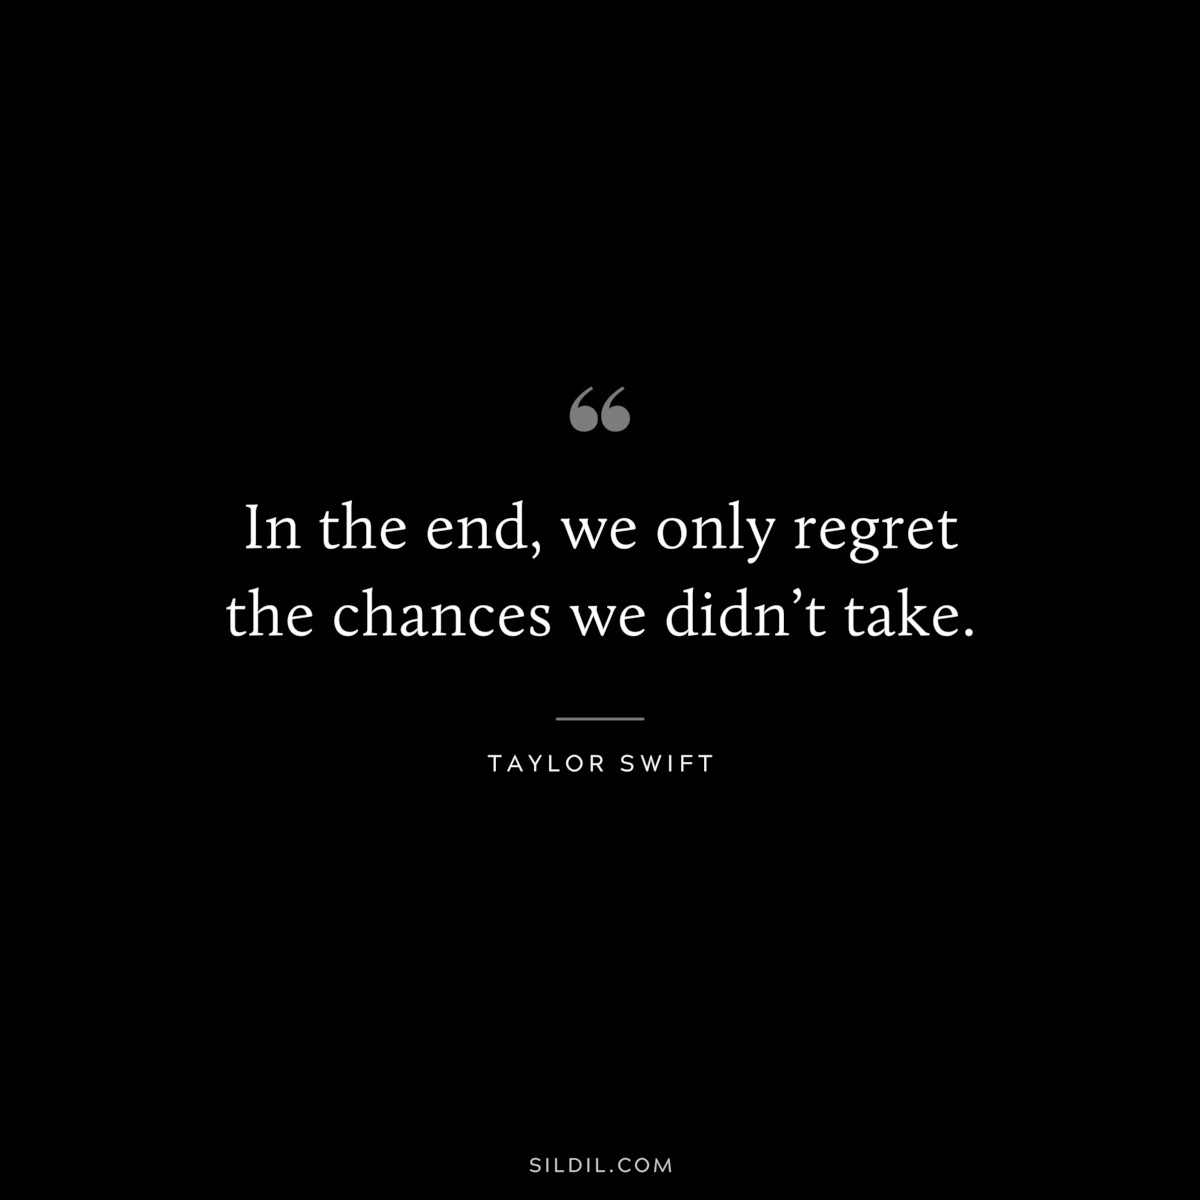 In the end, we only regret the chances we didn’t take. ― Taylor Swift